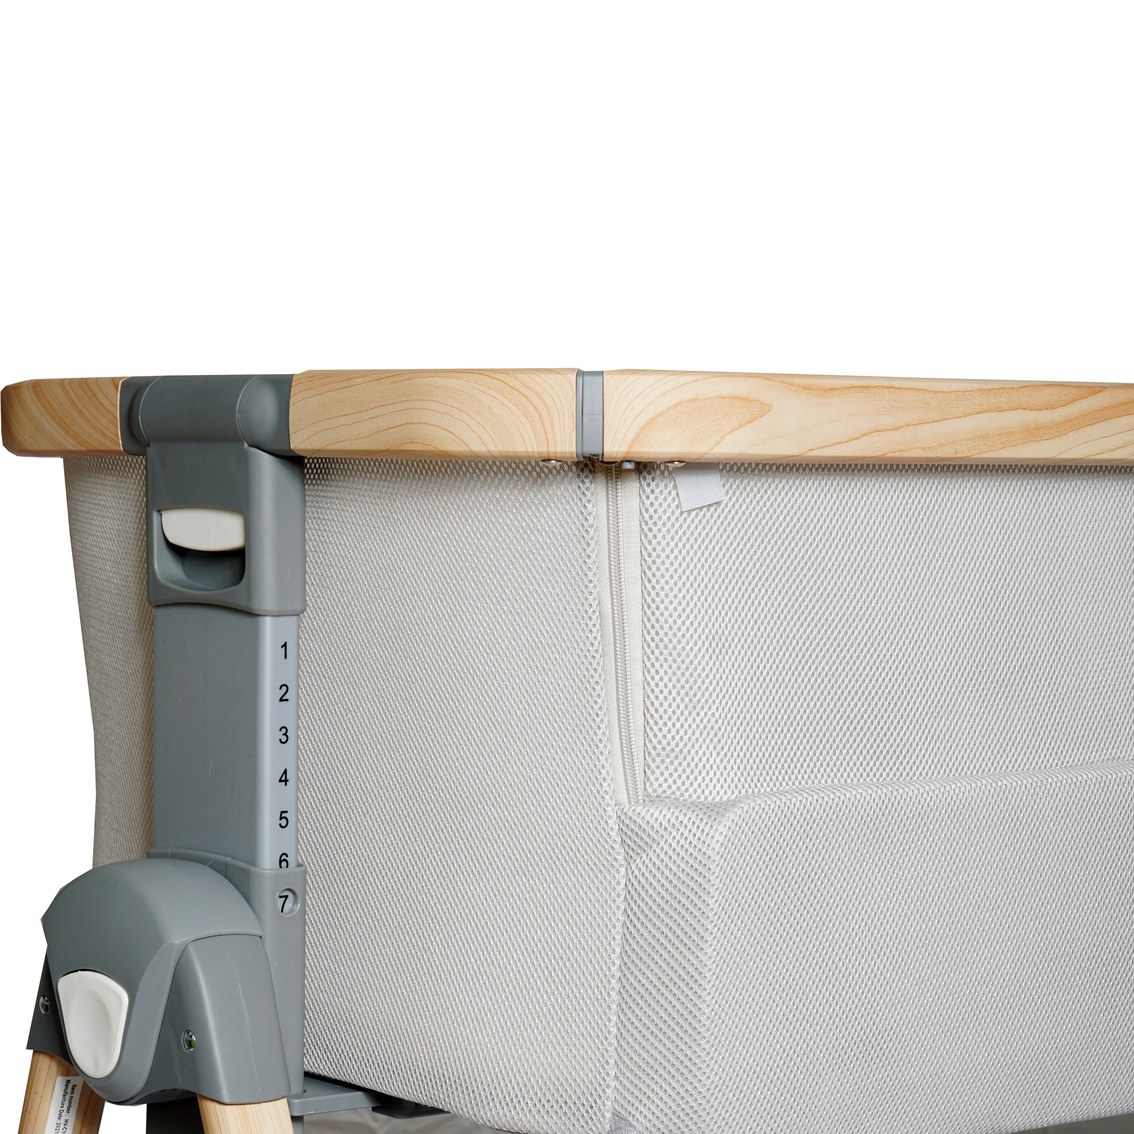 Venice Child California Dreaming Gray Wood Bedside Bassinet - Image 5 of 7